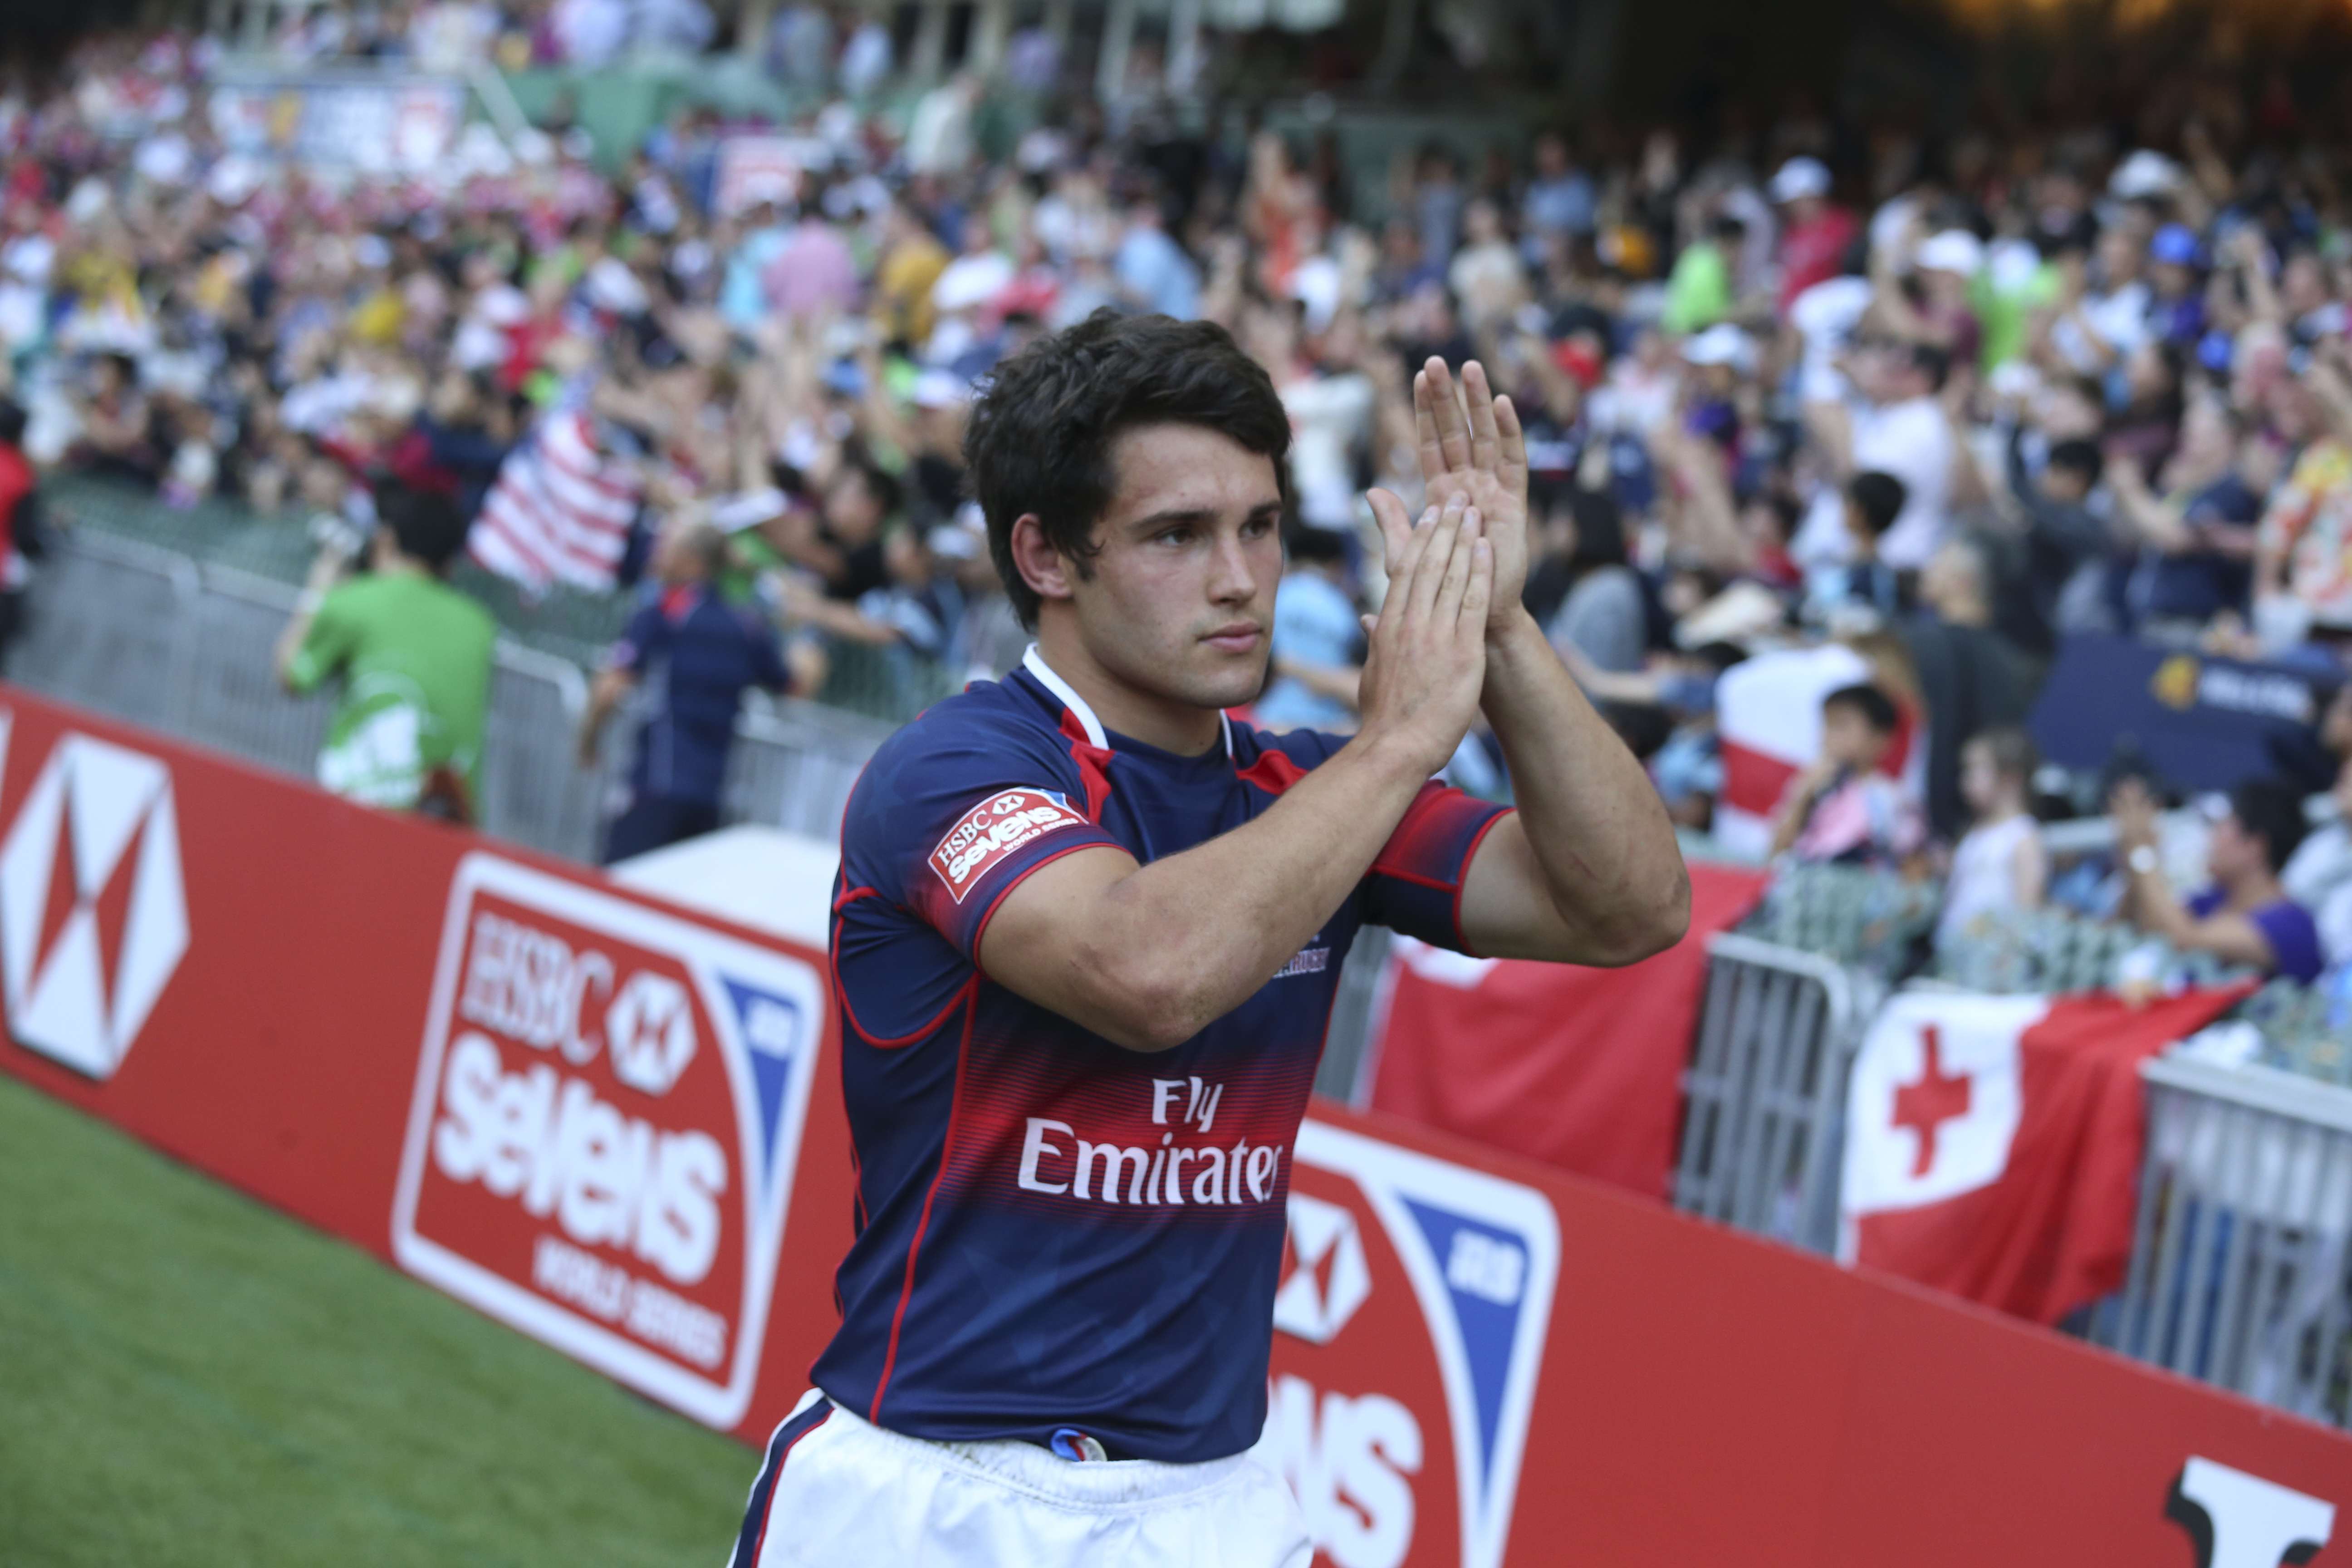 USA captain Madison Hughes at the Hong Kong Sevens in April this year. Photo: SCMP Pictures